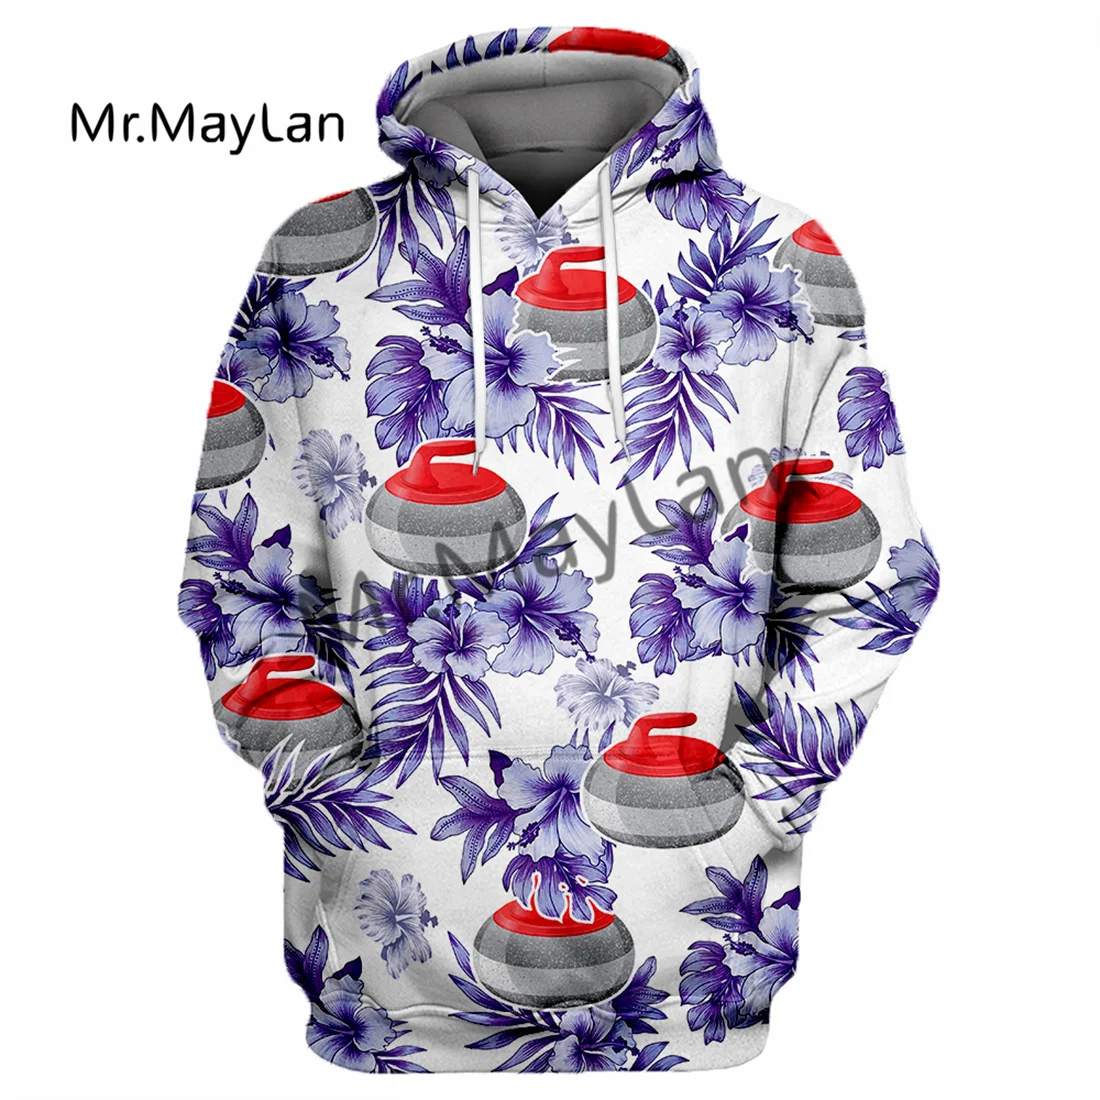 

3D Print Leisure Fashion Unisex Colorful The Sport Of Curling Trees Hooded Sweatshirt Clothes Men Streetwear Zip Jackets DW-225